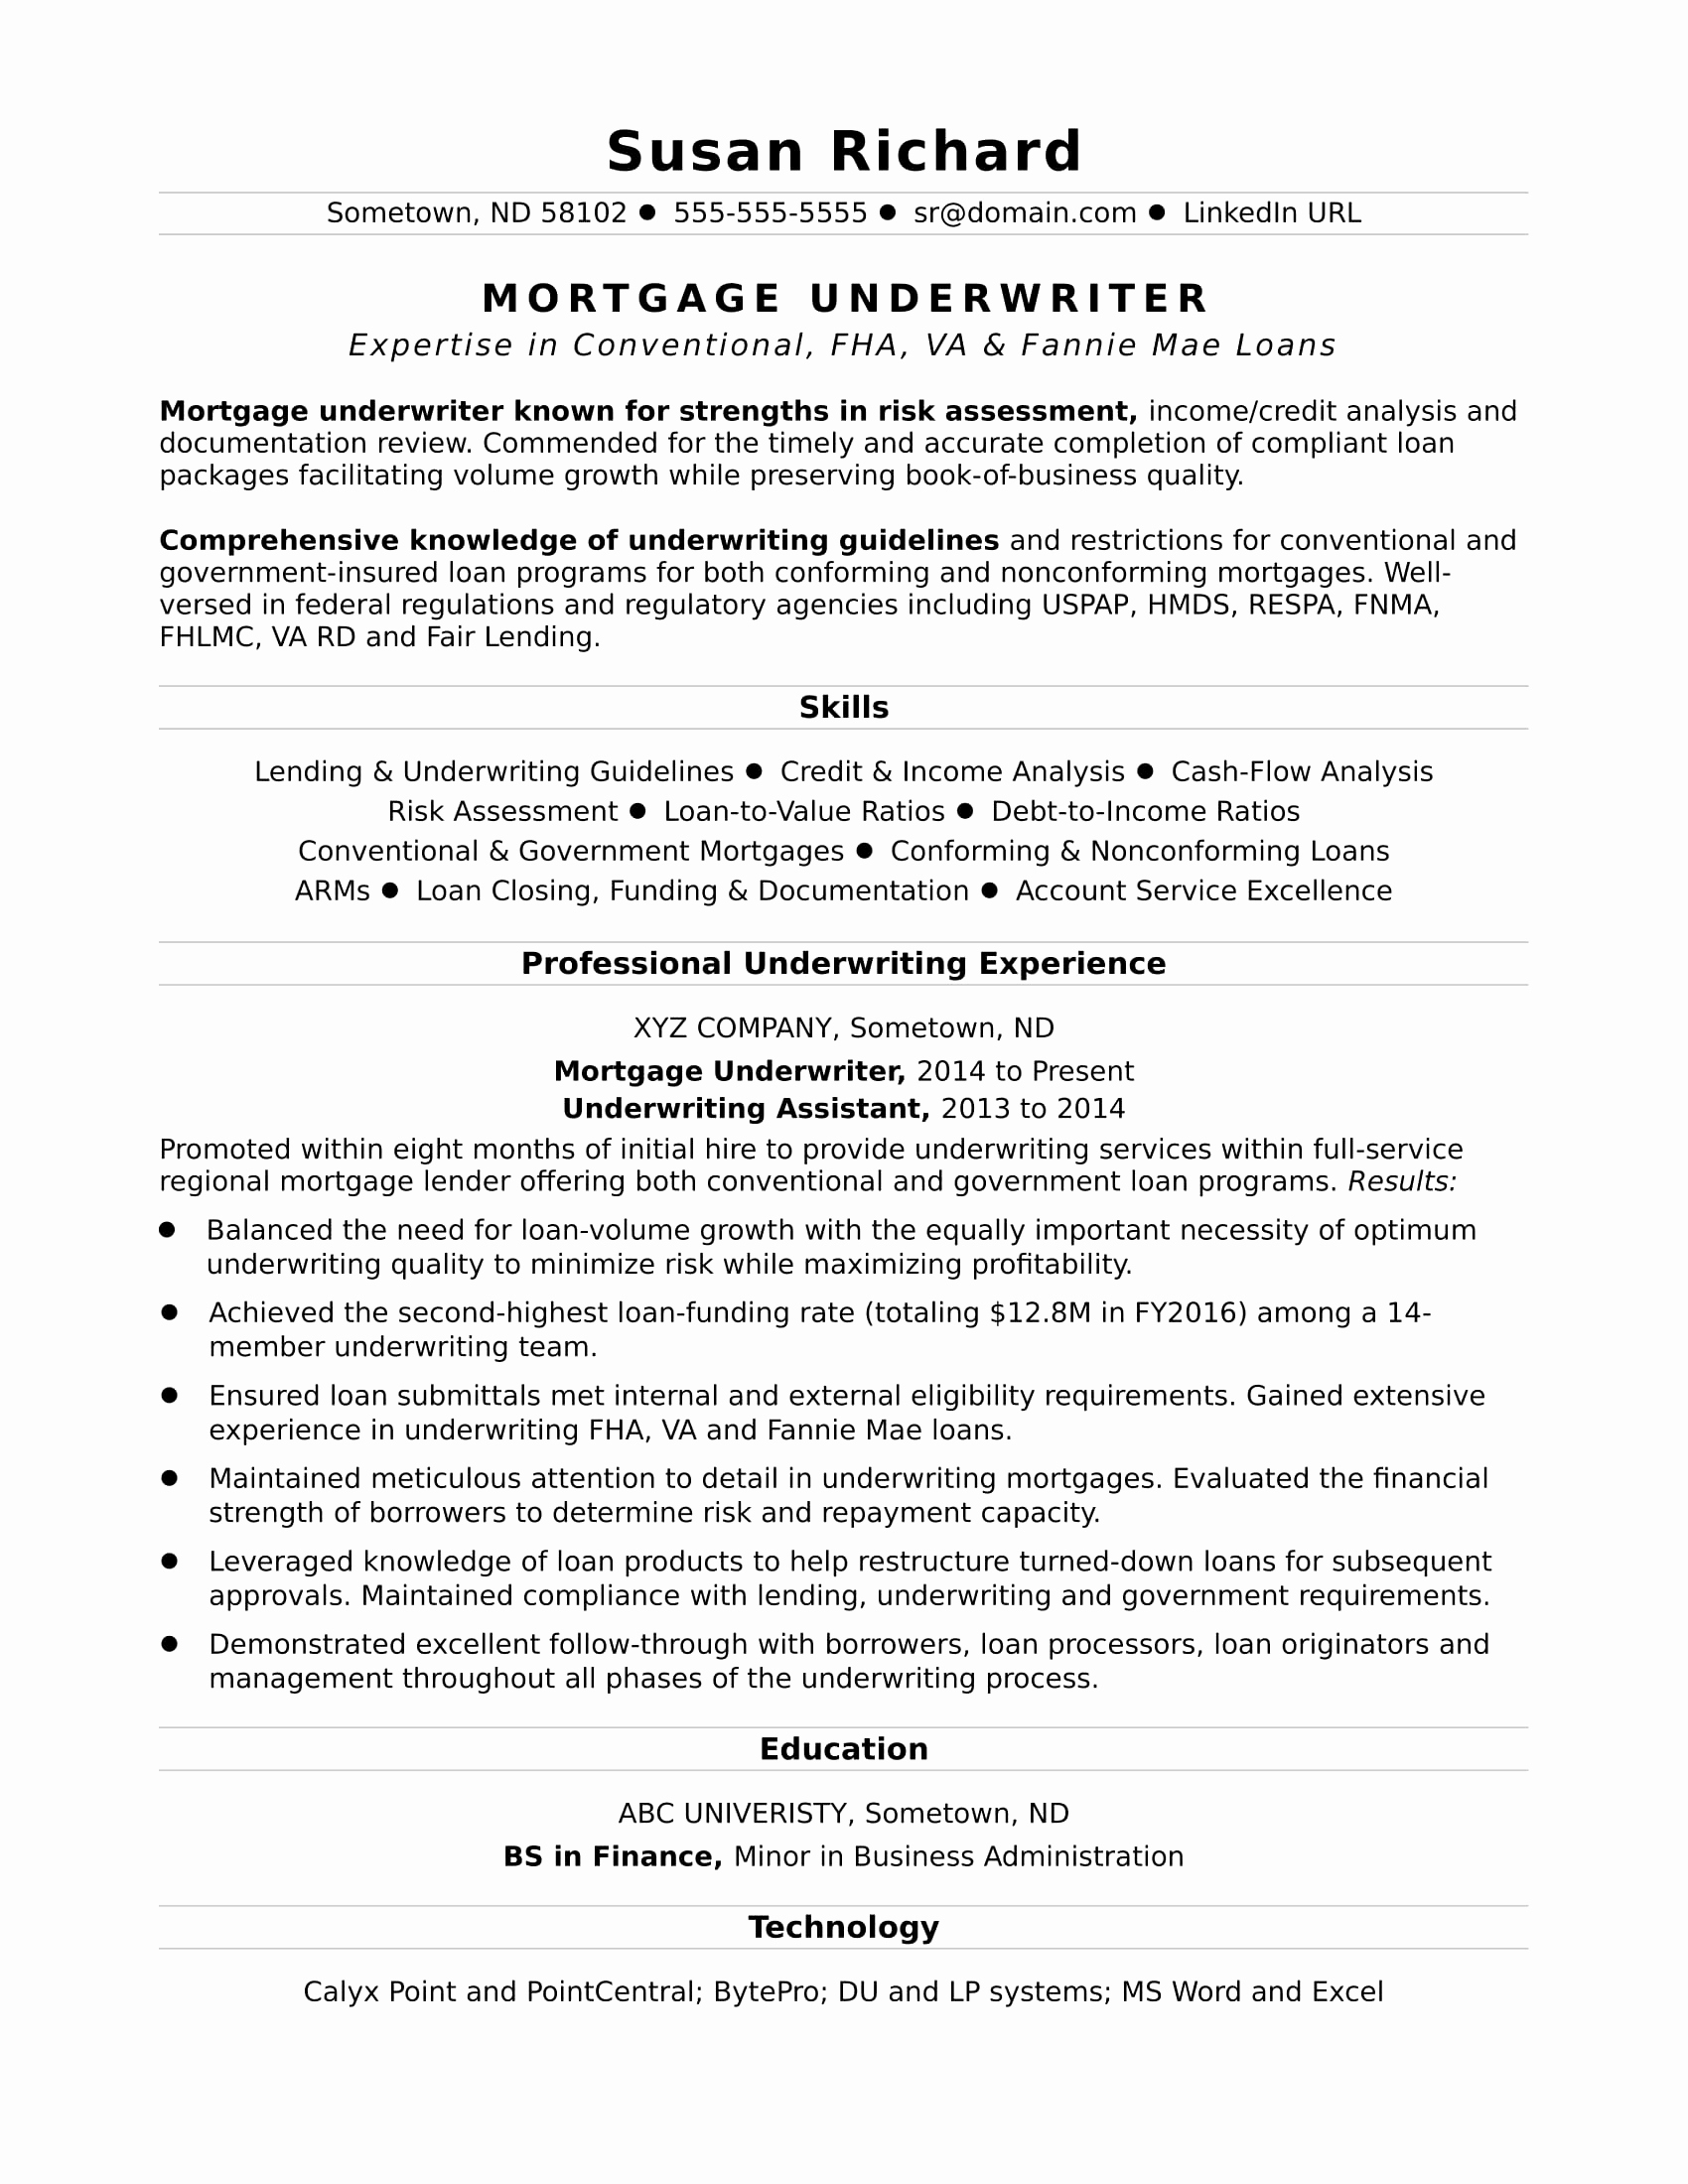 Cover Letter Template for Receptionist - Cover Letter for Receptionist Job Awesome Free Resume Builder